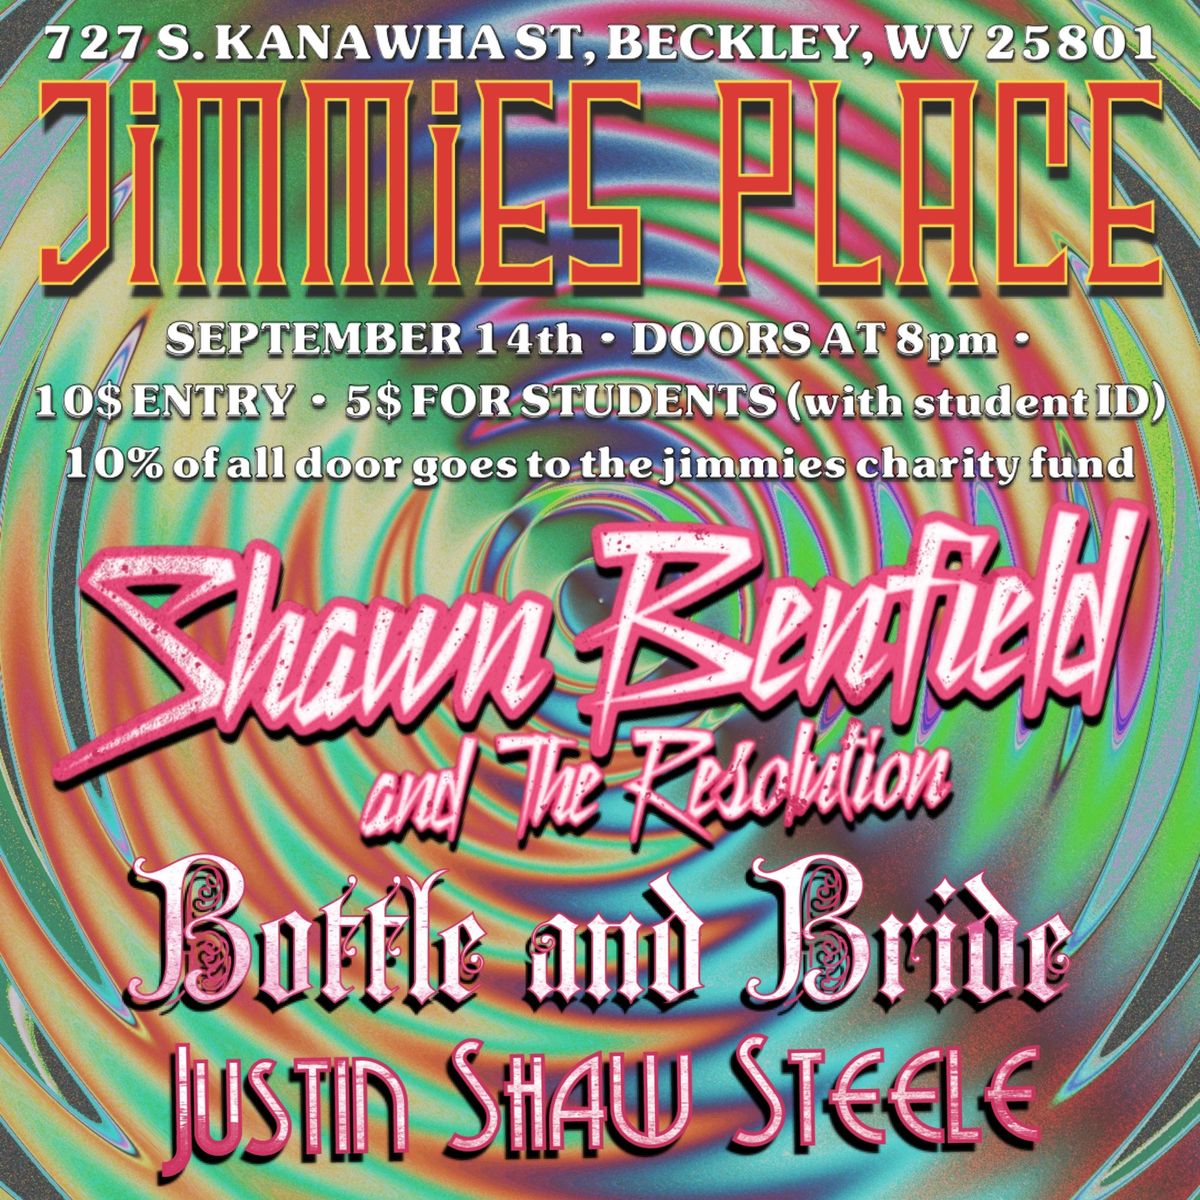 Shawn Benfield and the Resolution, Bottle and Bride, and Justin Shaw Steele LIVE @ Jimmies Place